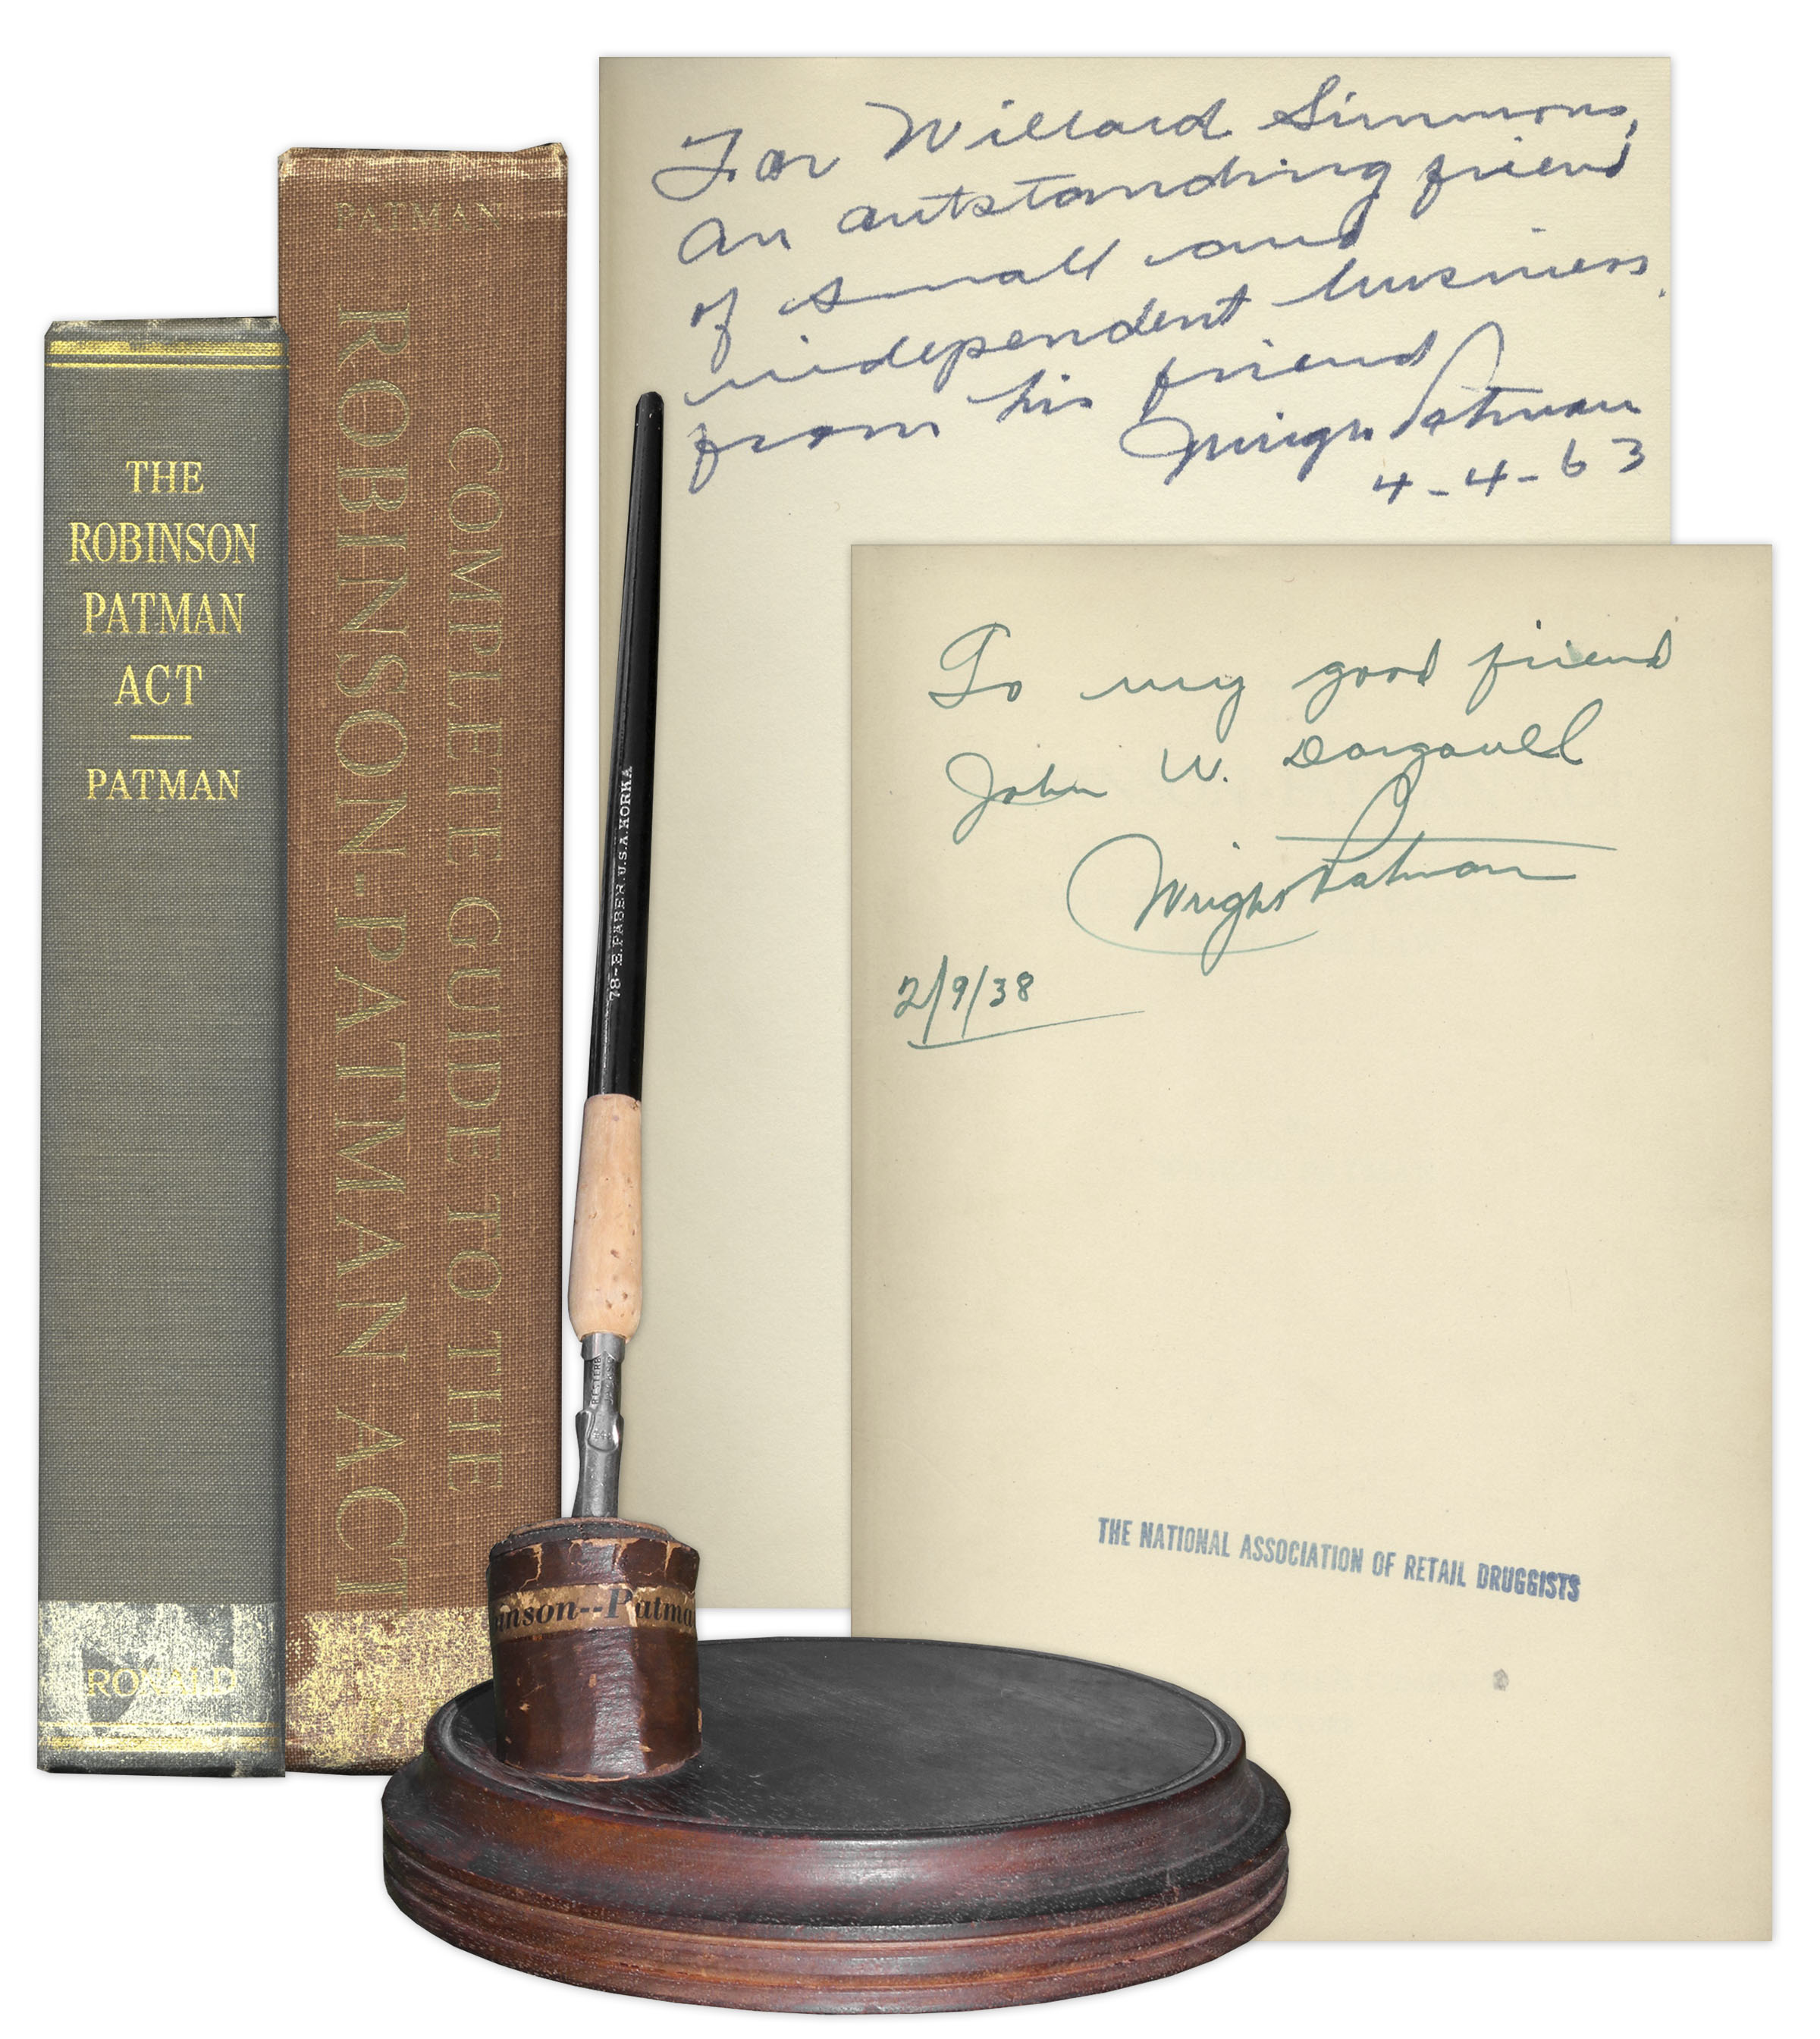 White House Pen President Franklin D. Roosevelt Pen Used to Sign the Important Robinson-Patman Act Into Law -- Designed to Help Local Stores Compete With Large Retailers